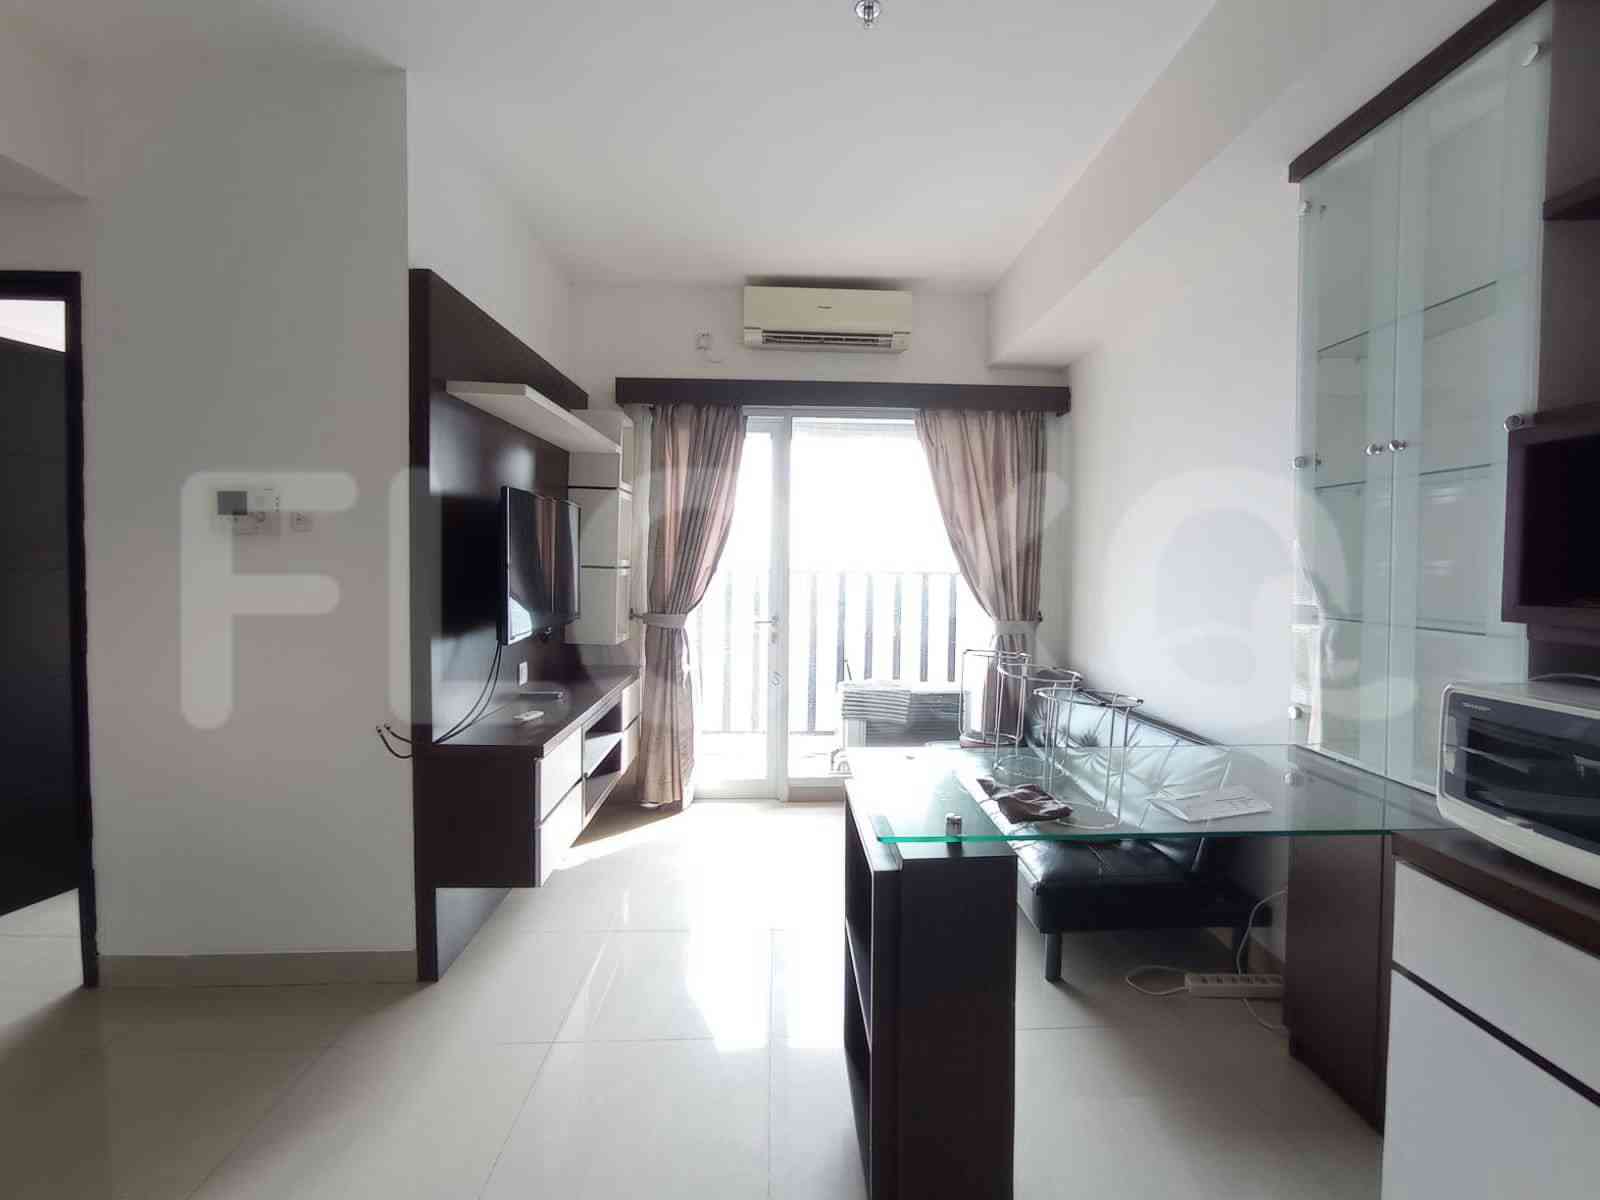 2 Bedroom on 16th Floor for Rent in Skyline Paramount Serpong - fga58c 7